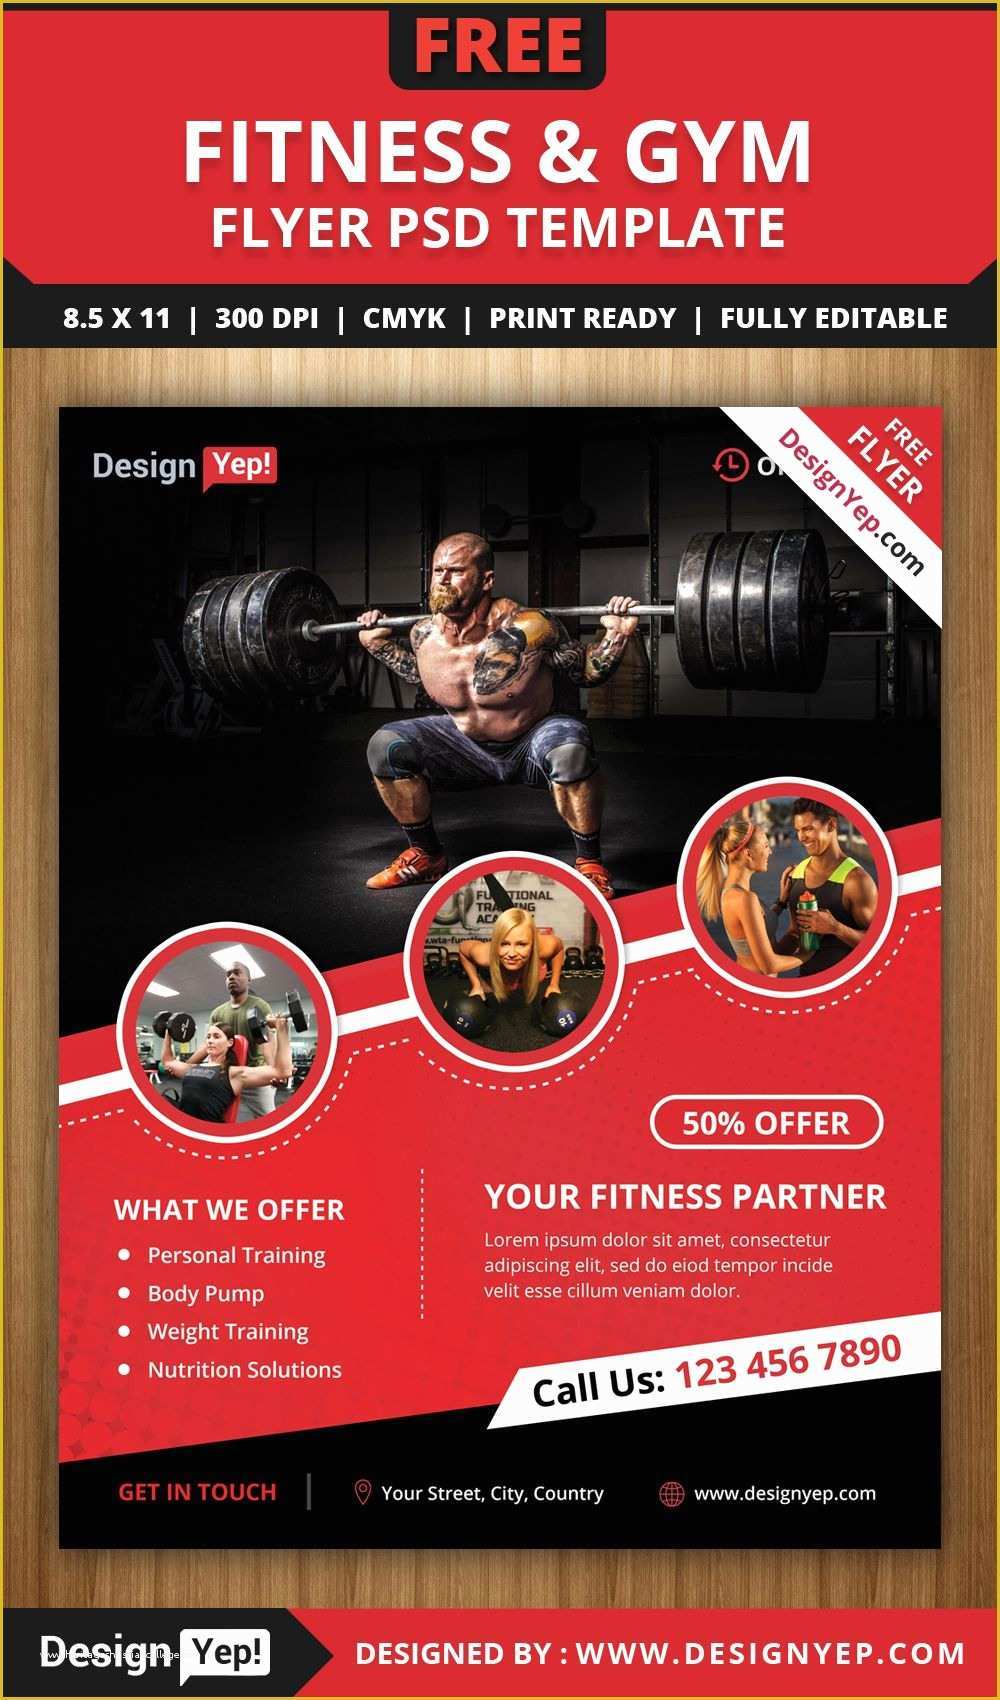 Gym Flyer Template Free Of Free Fitness & Gym Flyer Psd Template